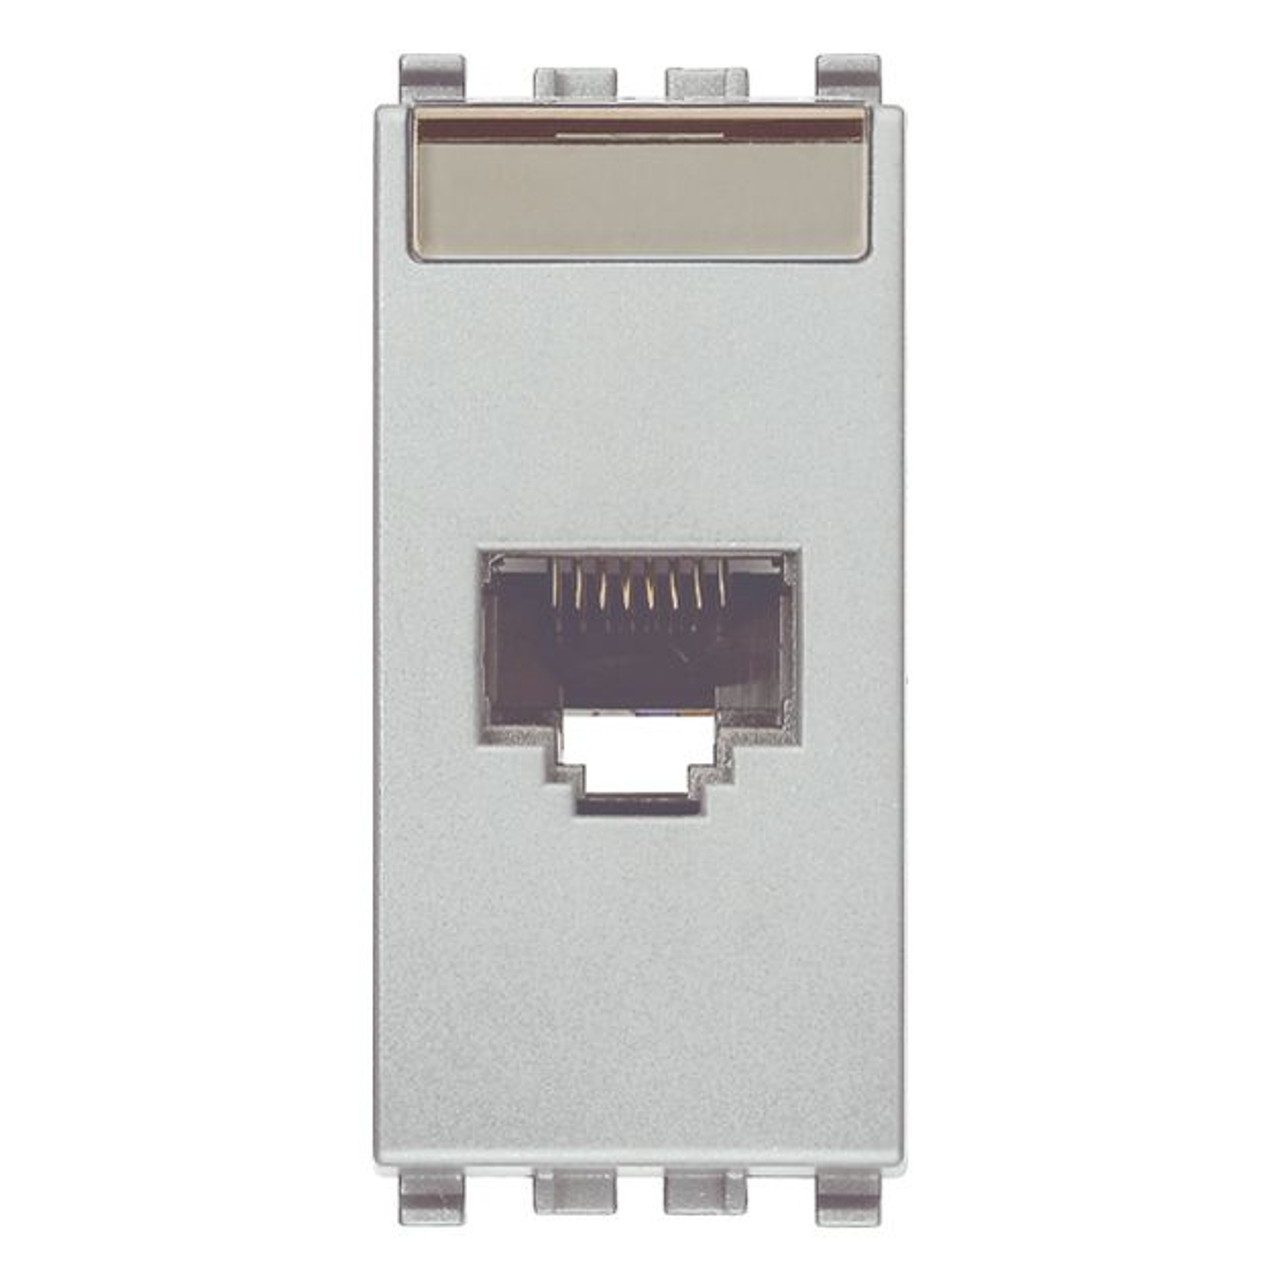 Vimar - Net Safe 20339.16 FTP Socket Outlet - RJ45 Connector, Cat6a, Shielded, T568A/B Universal Wiring, 8 Contacts - Apollo Lighting